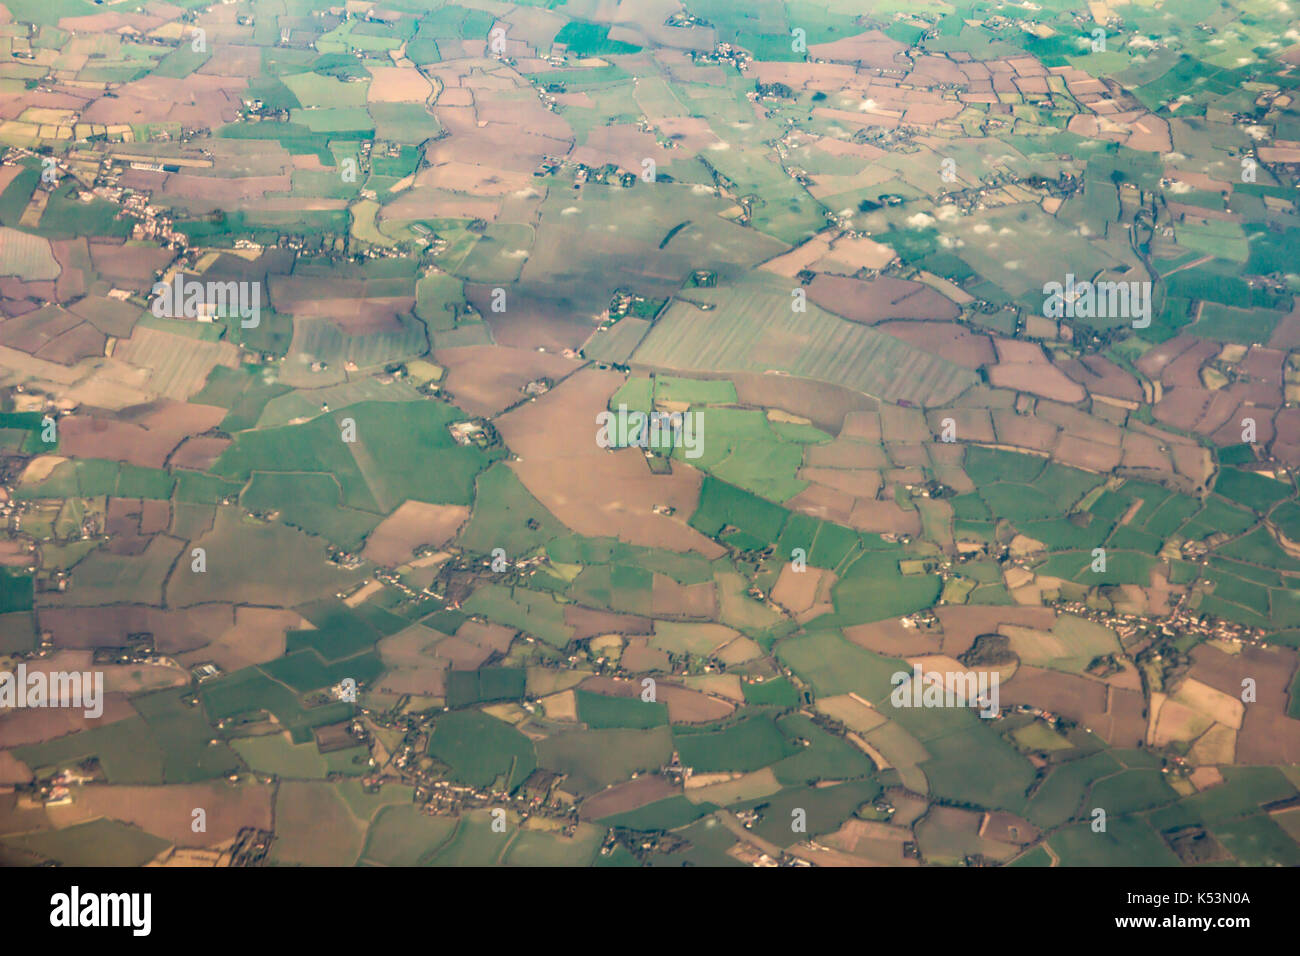 Small city and  Farm landscape with some clouds made from airplane illuminator Stock Photo